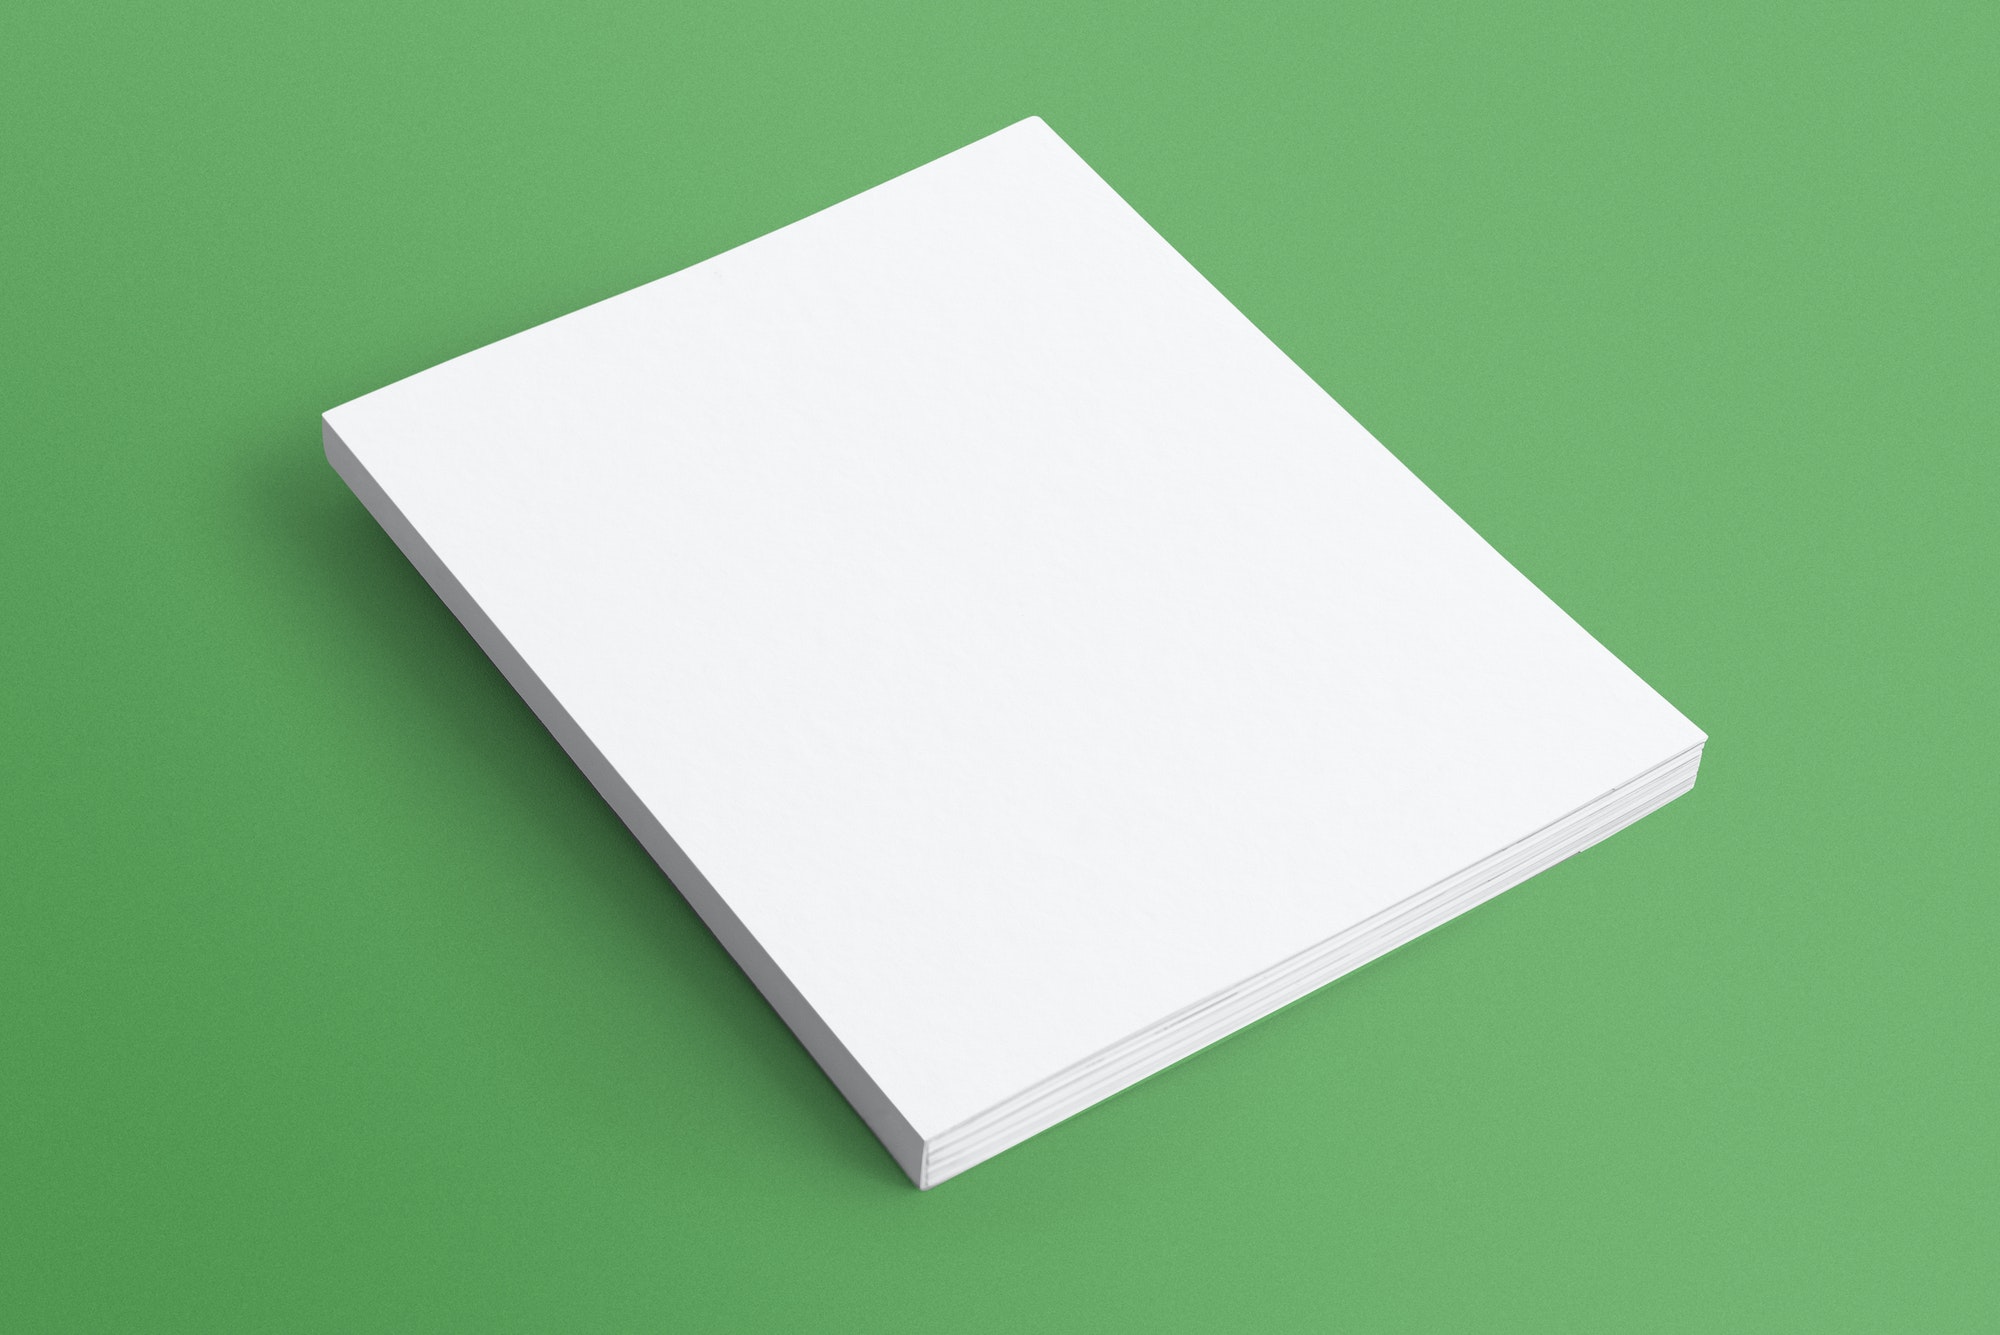 Blank book on green background